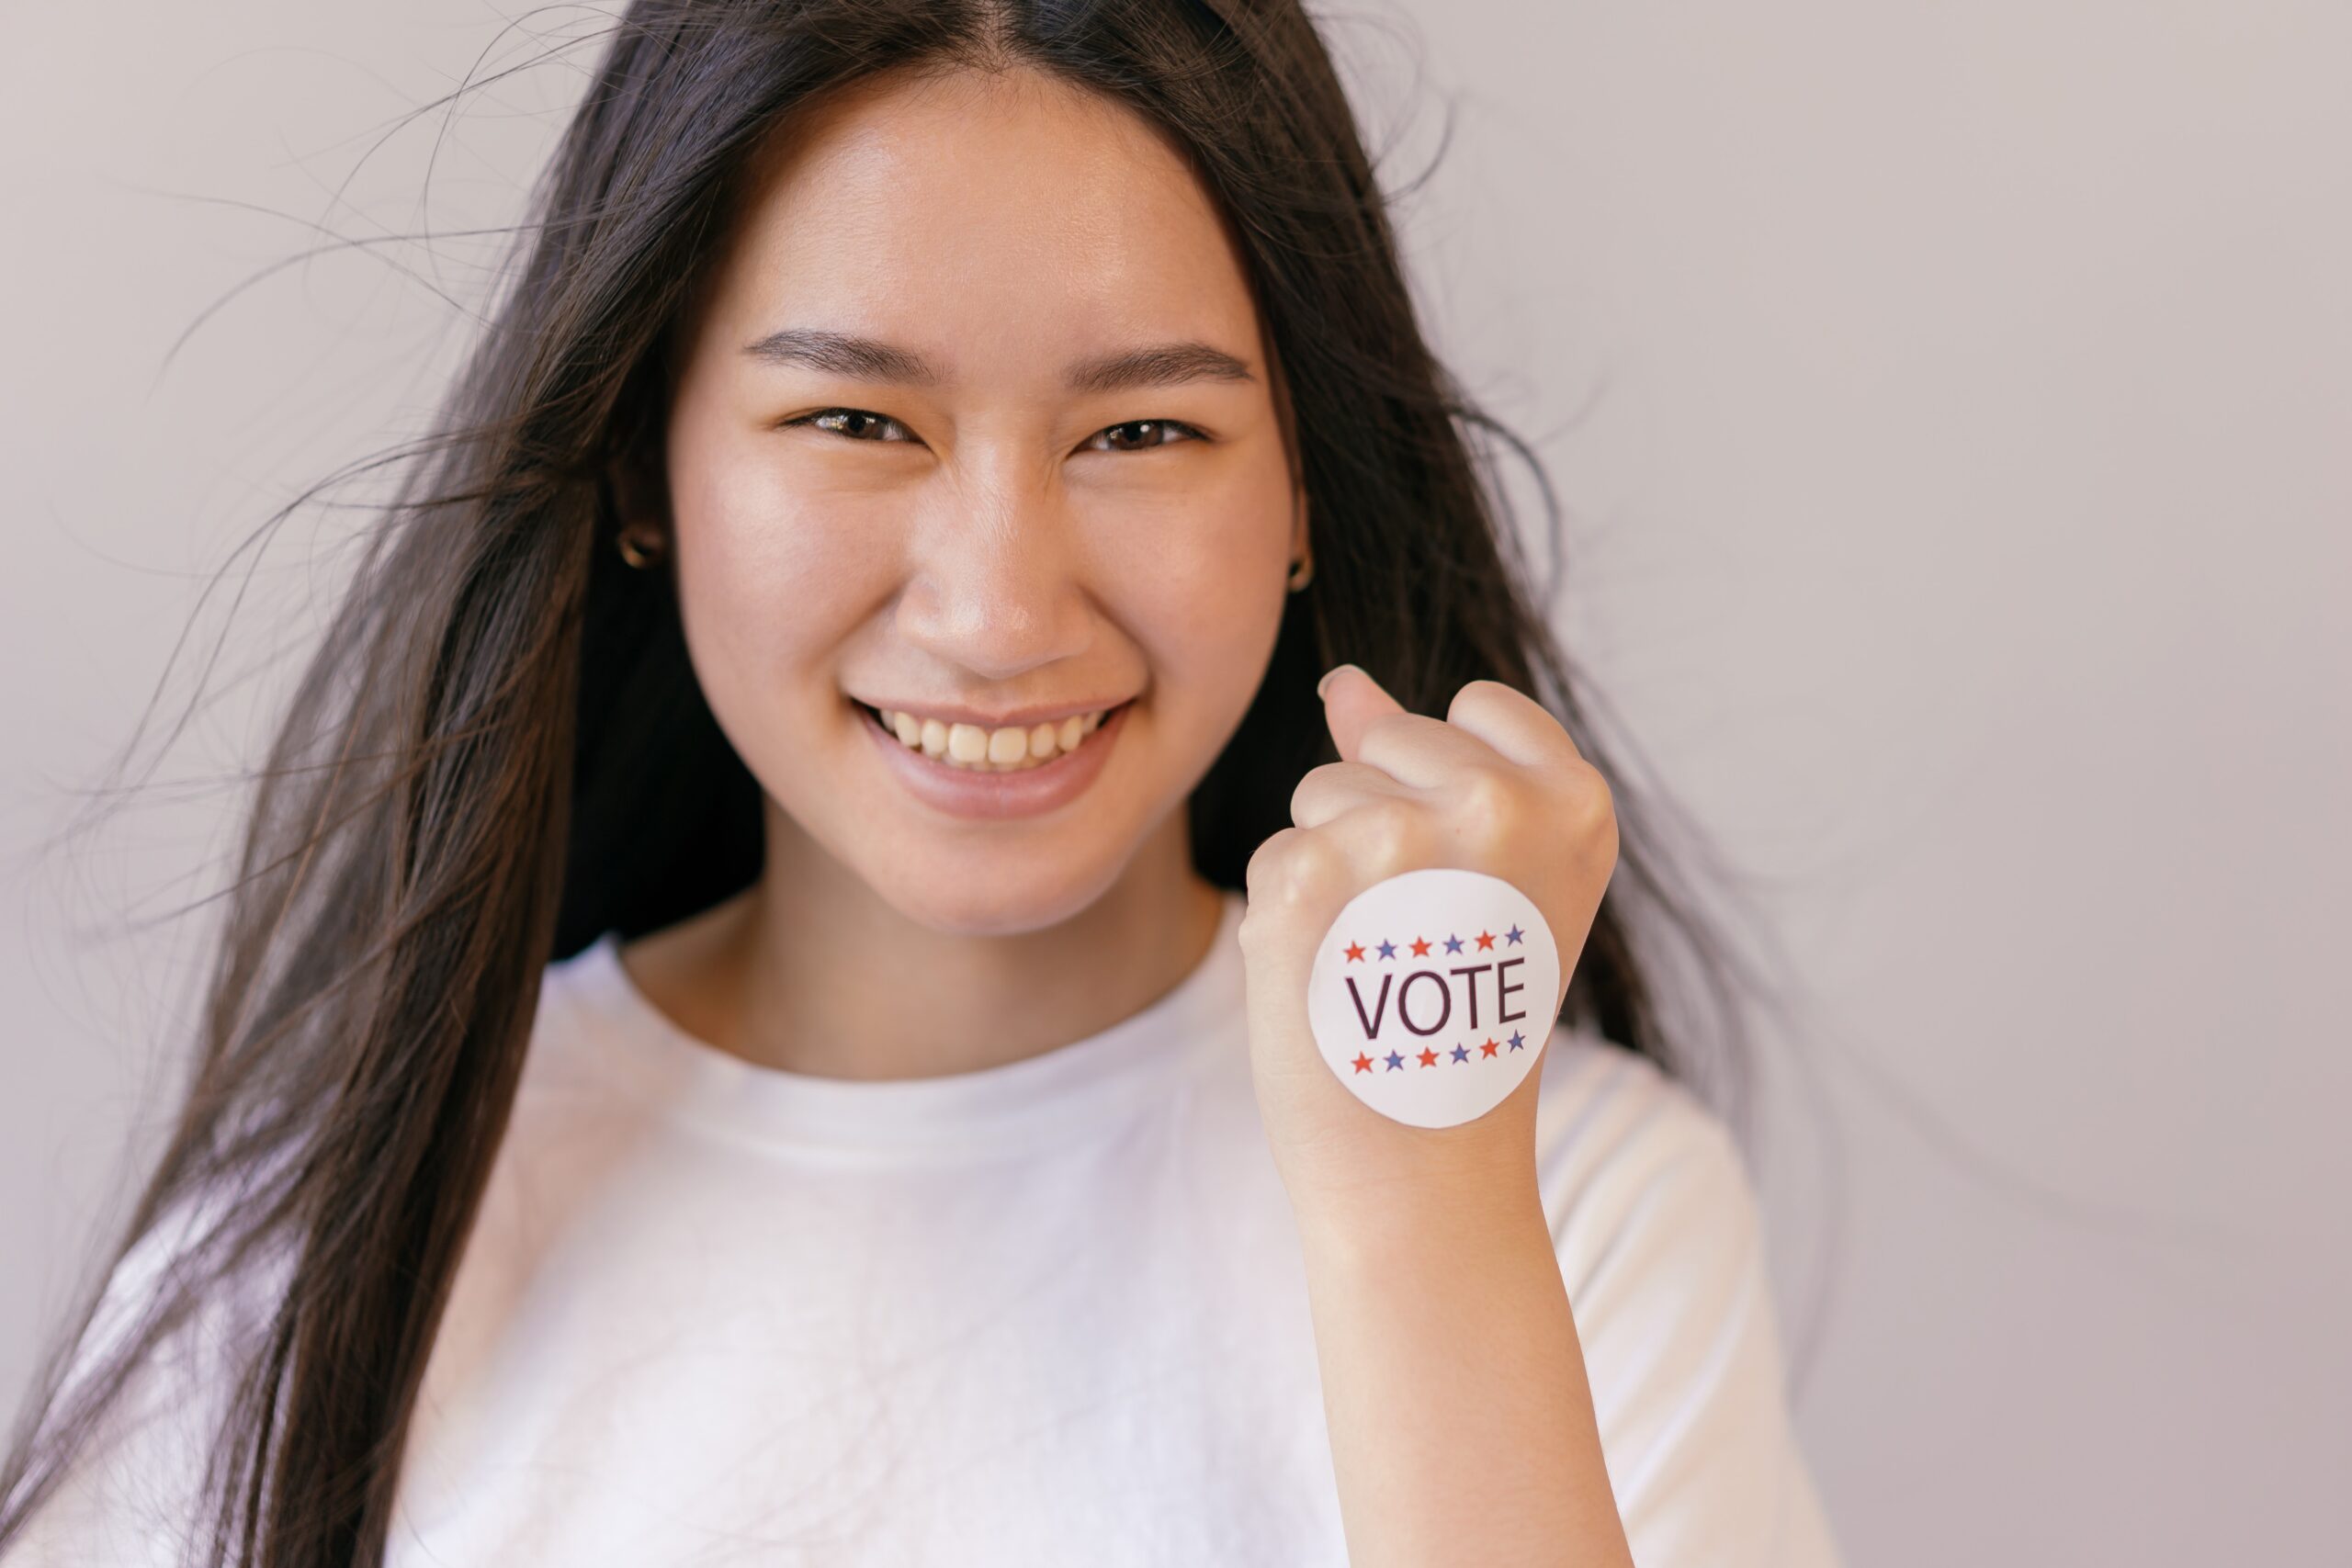 Young women with sticker on hand that says "VOTE"